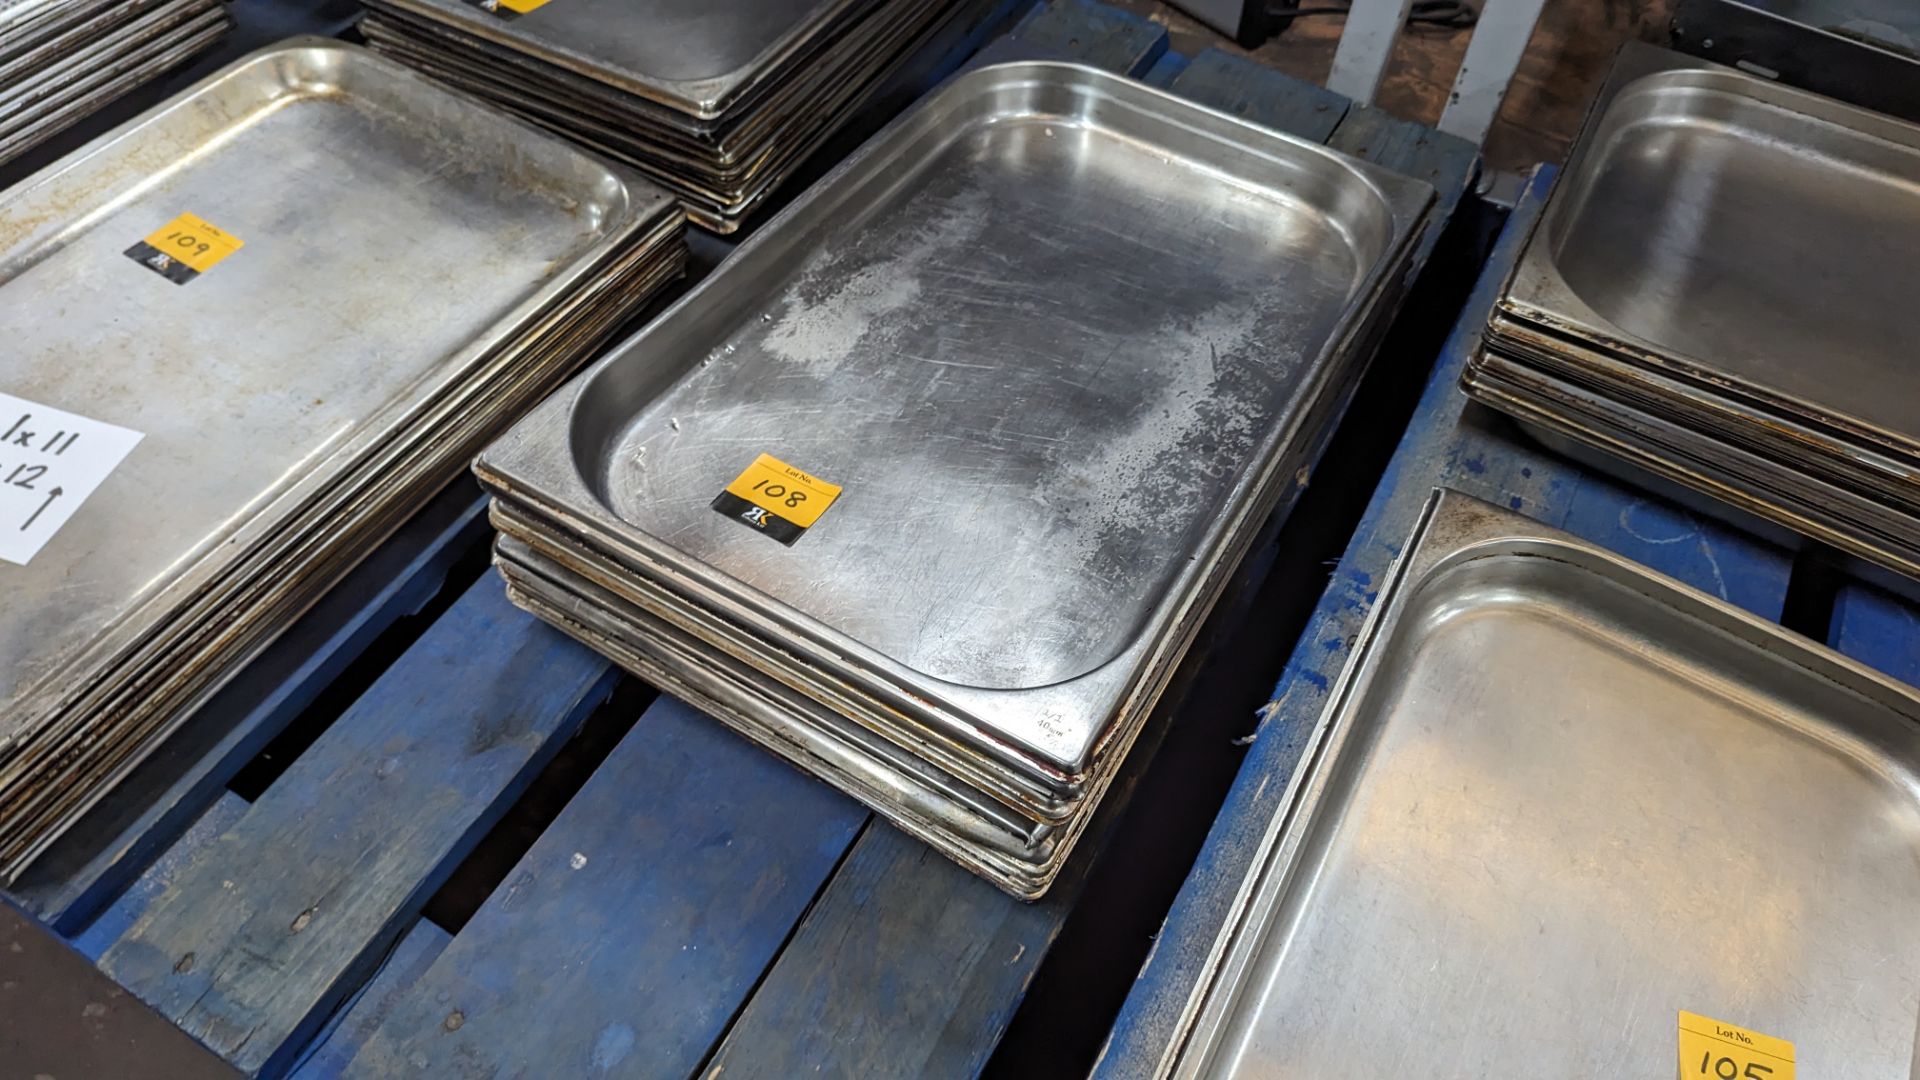 12 off stainless steel trays each measuring 530mm x 330mm x 50mm. NB these trays are shallower than